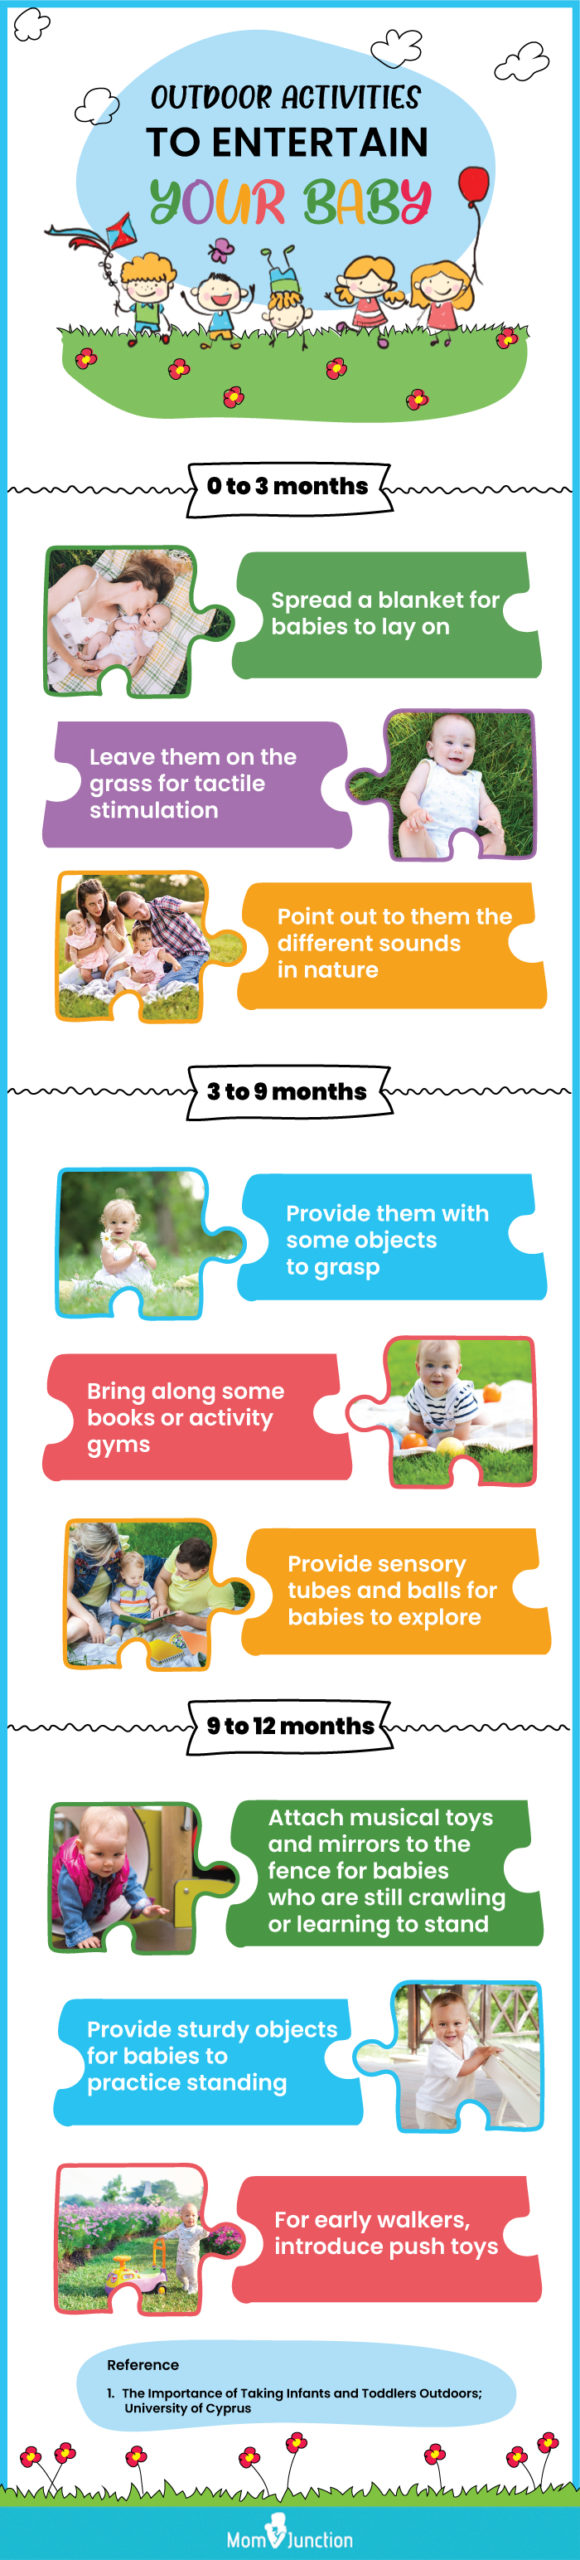 outdor activitiesto entertain your baby [infographic]